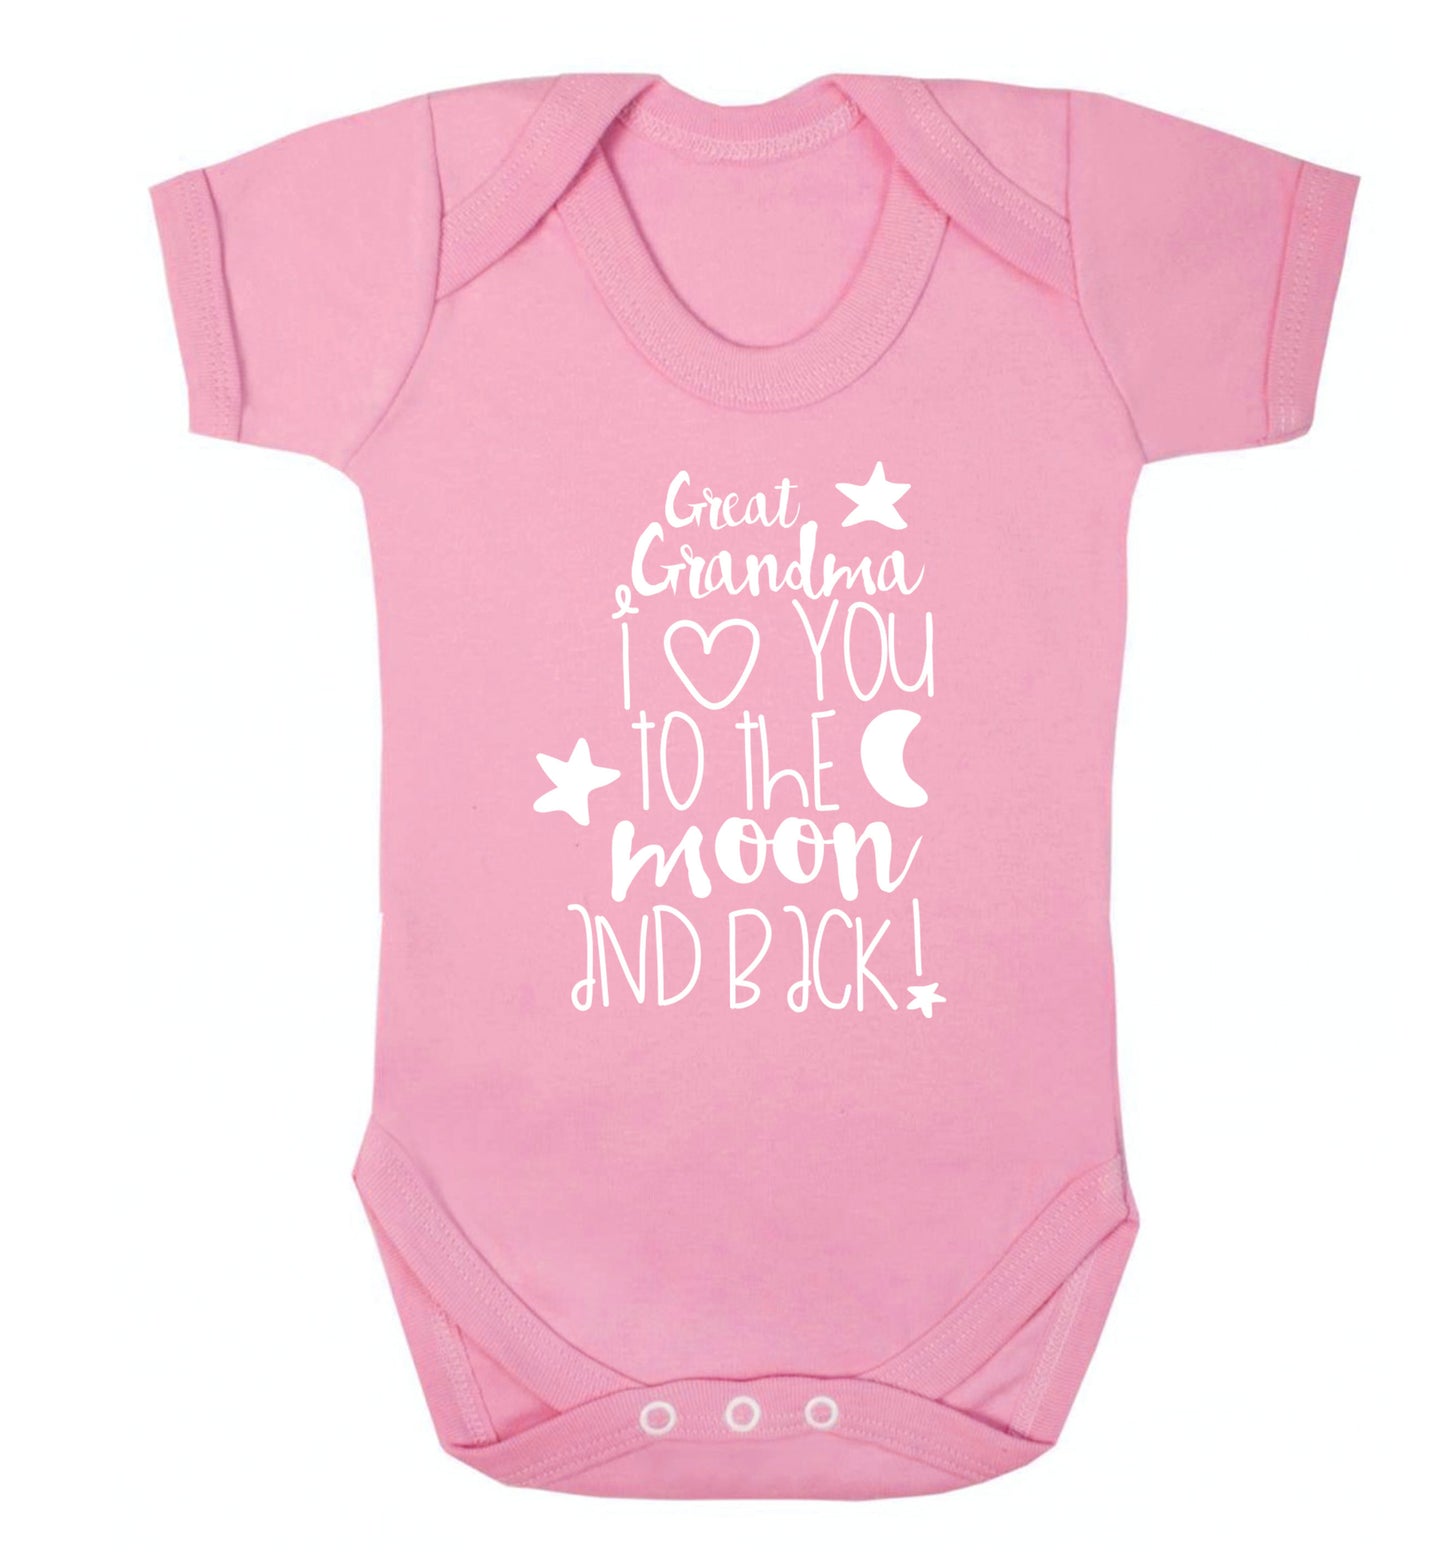 Great Grandma I love you to the moon and back Baby Vest pale pink 18-24 months